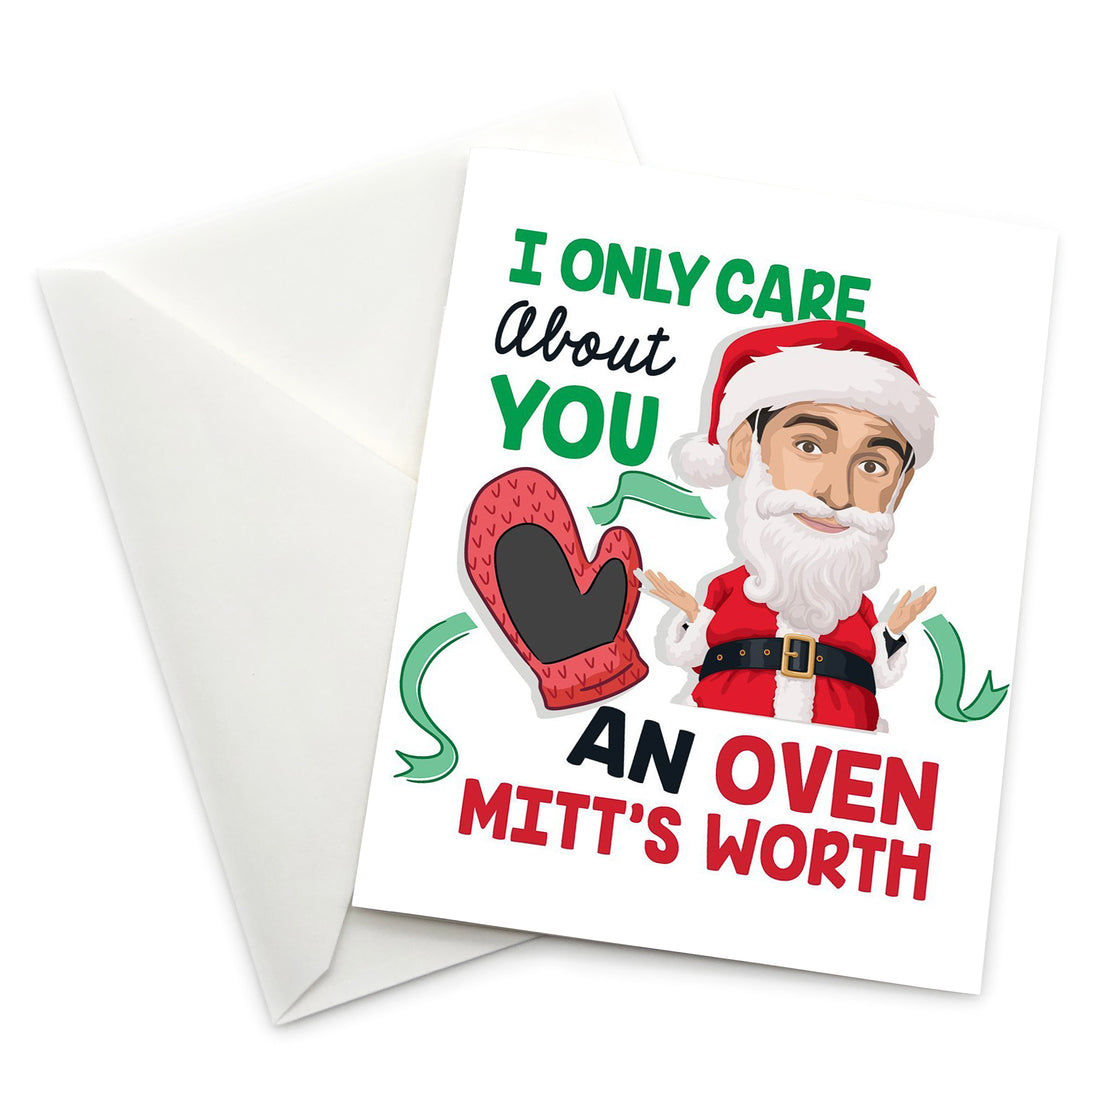 Greeting Card: The Office, I Only Care About You an Oven Mitt's Worth - Pack of 6